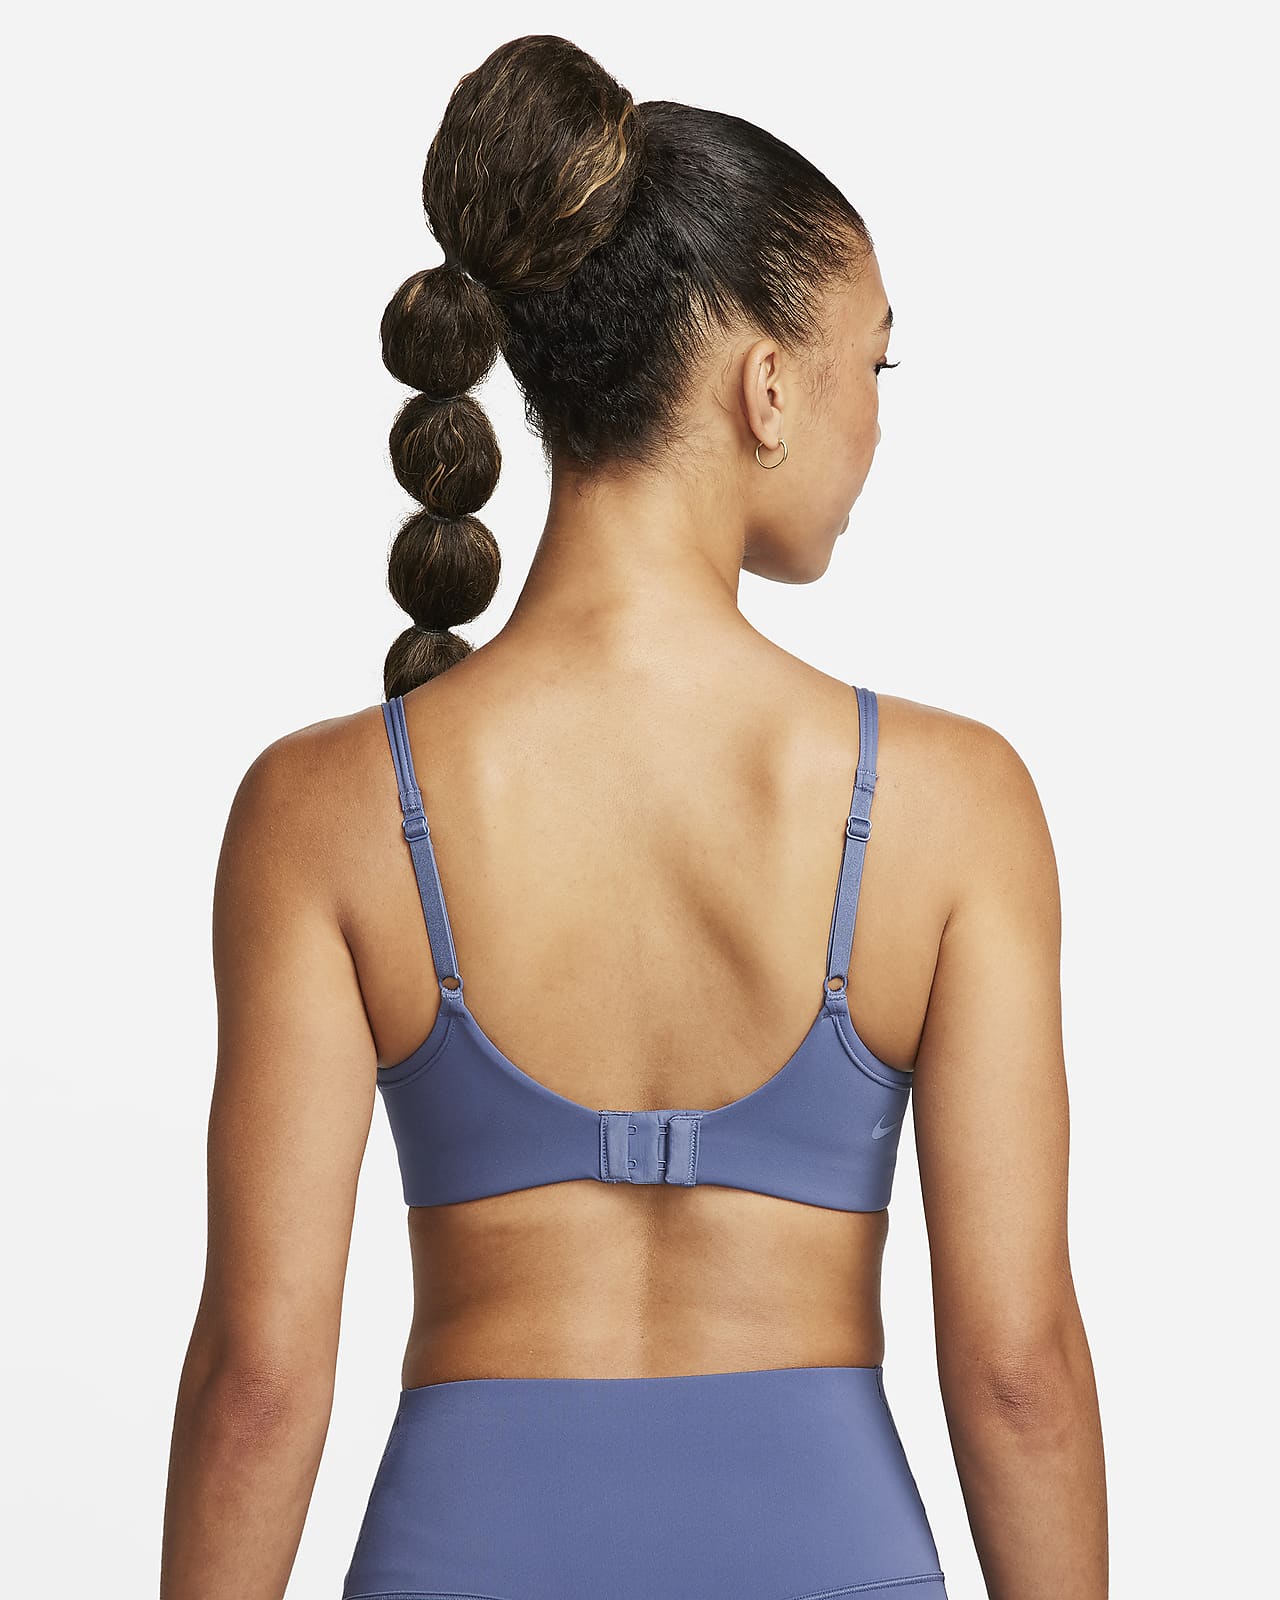 Nike Pro Indy Cooling Light Support Sports Bra